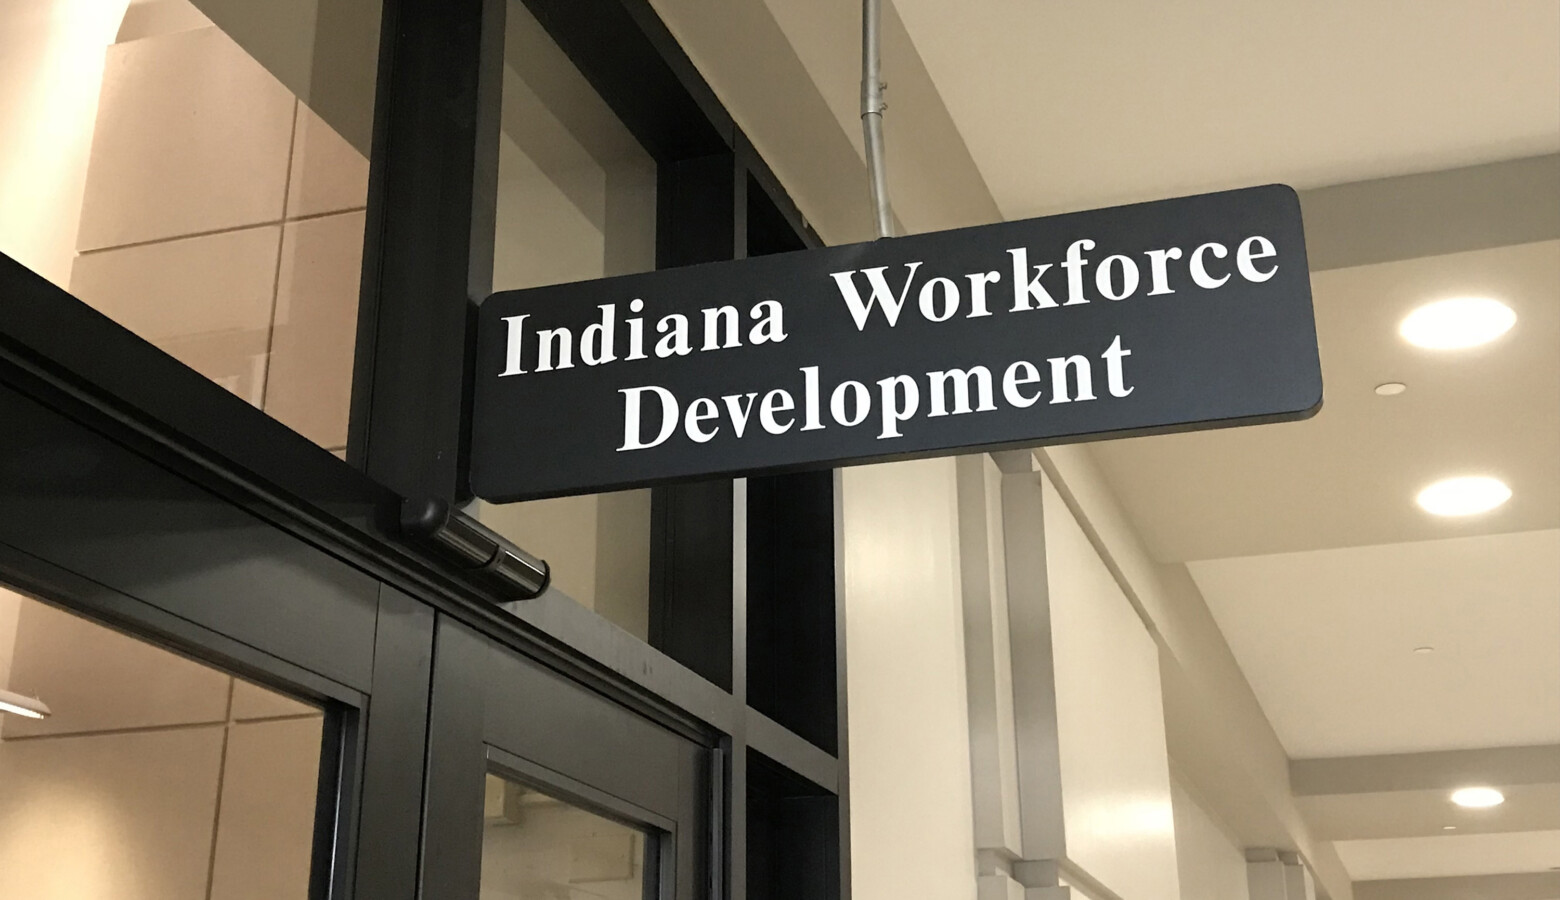 Starting June 1, out-of-work Hoosiers must actively search for a job to receive unemployment benefits. That requirement was suspended during the COVID-19 pandemic. (Brandon Smith/IPB News)